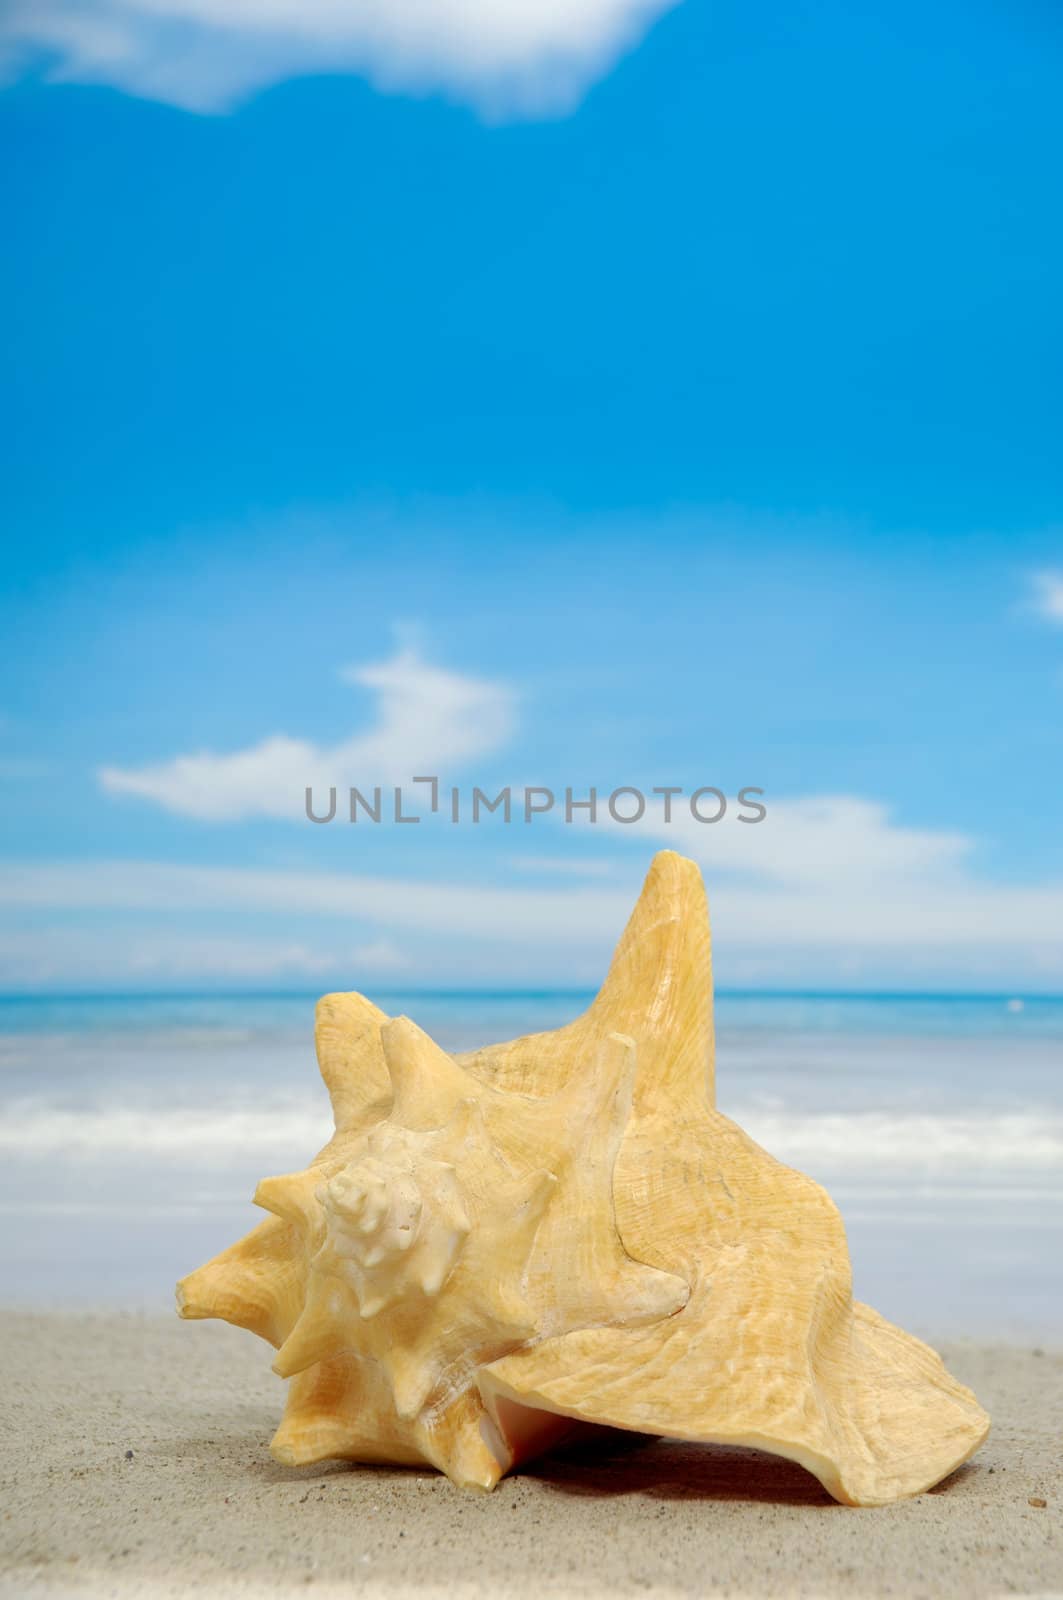 Conch on an exotic beach with the sea in the background.